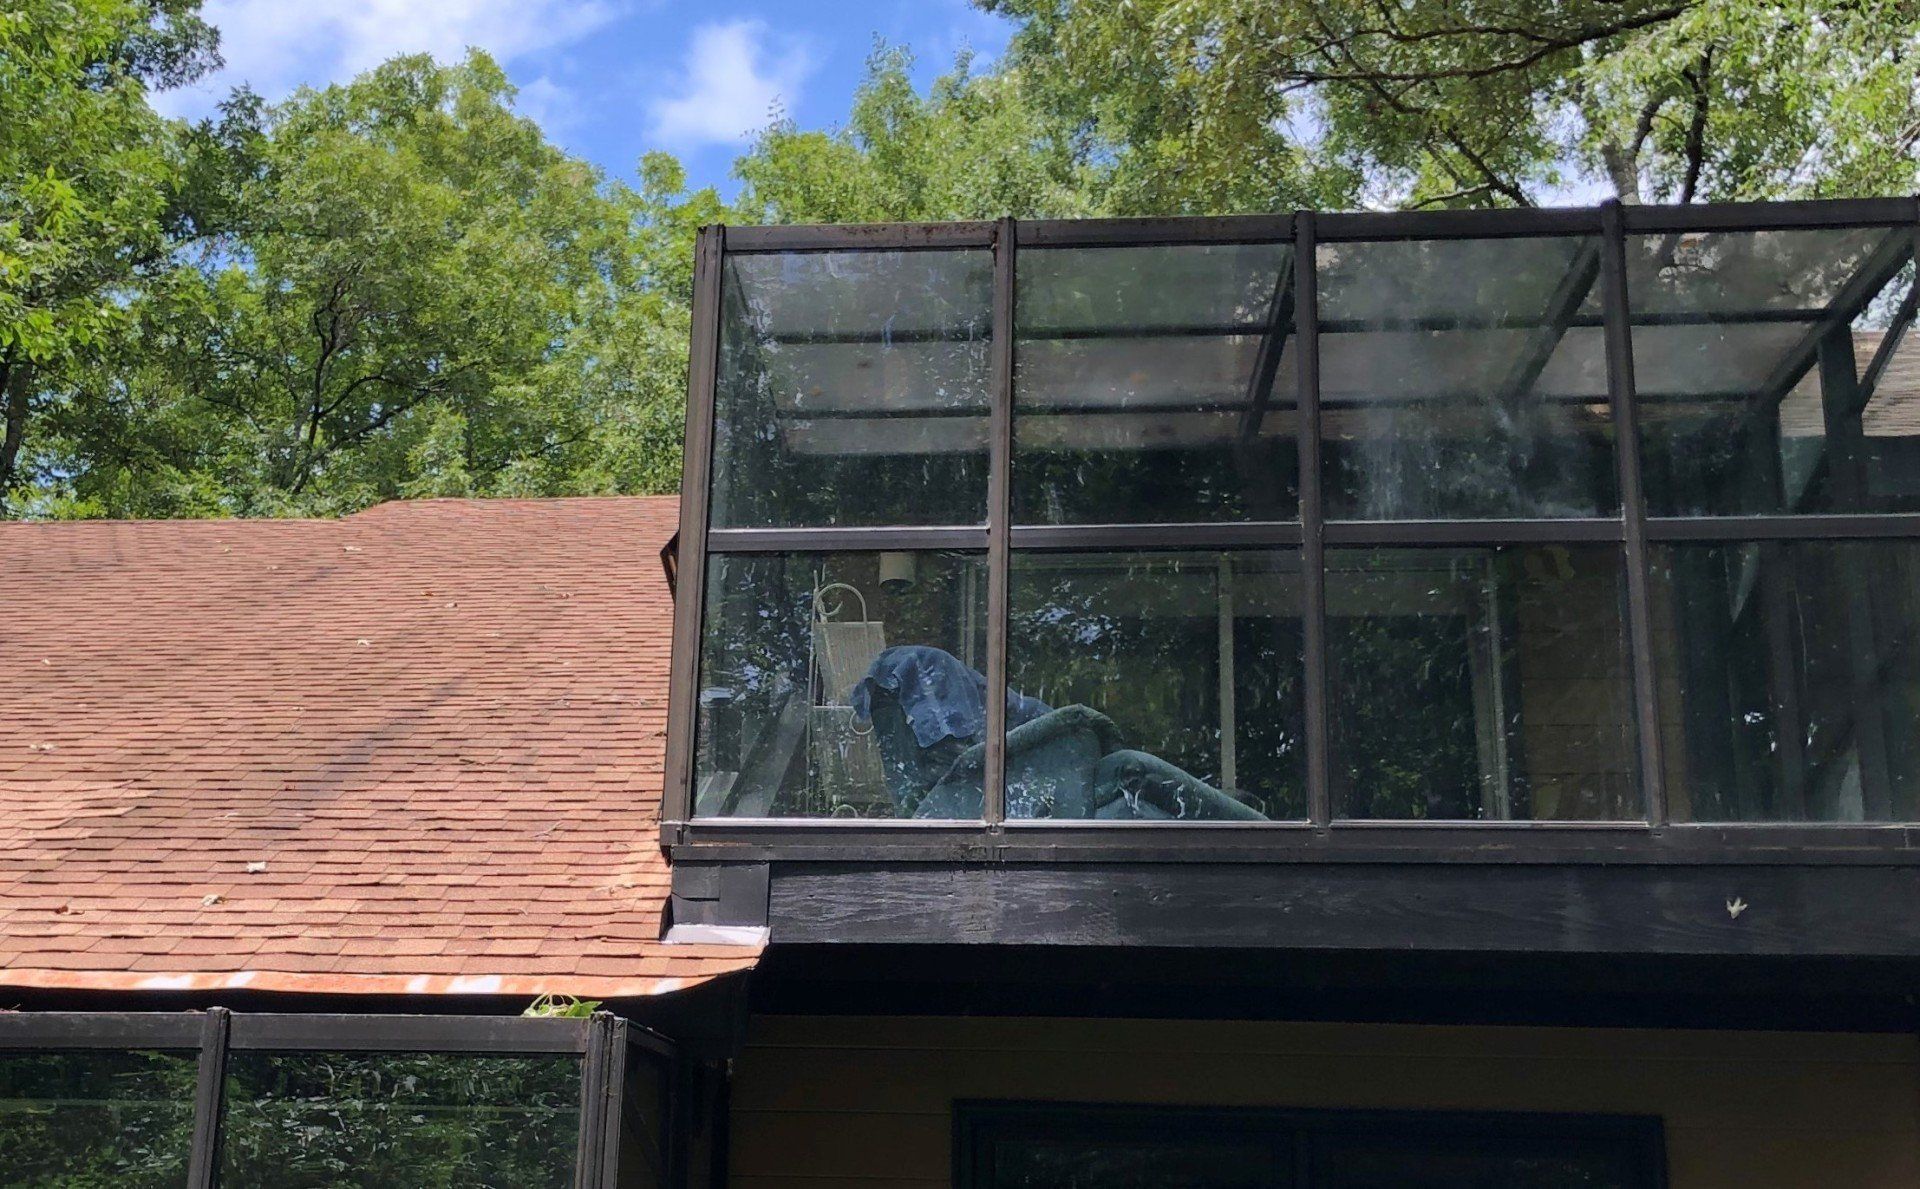 Professional tinting service in Auburn - Spf tint installed to home blocking heat and glare on 7.11.2019